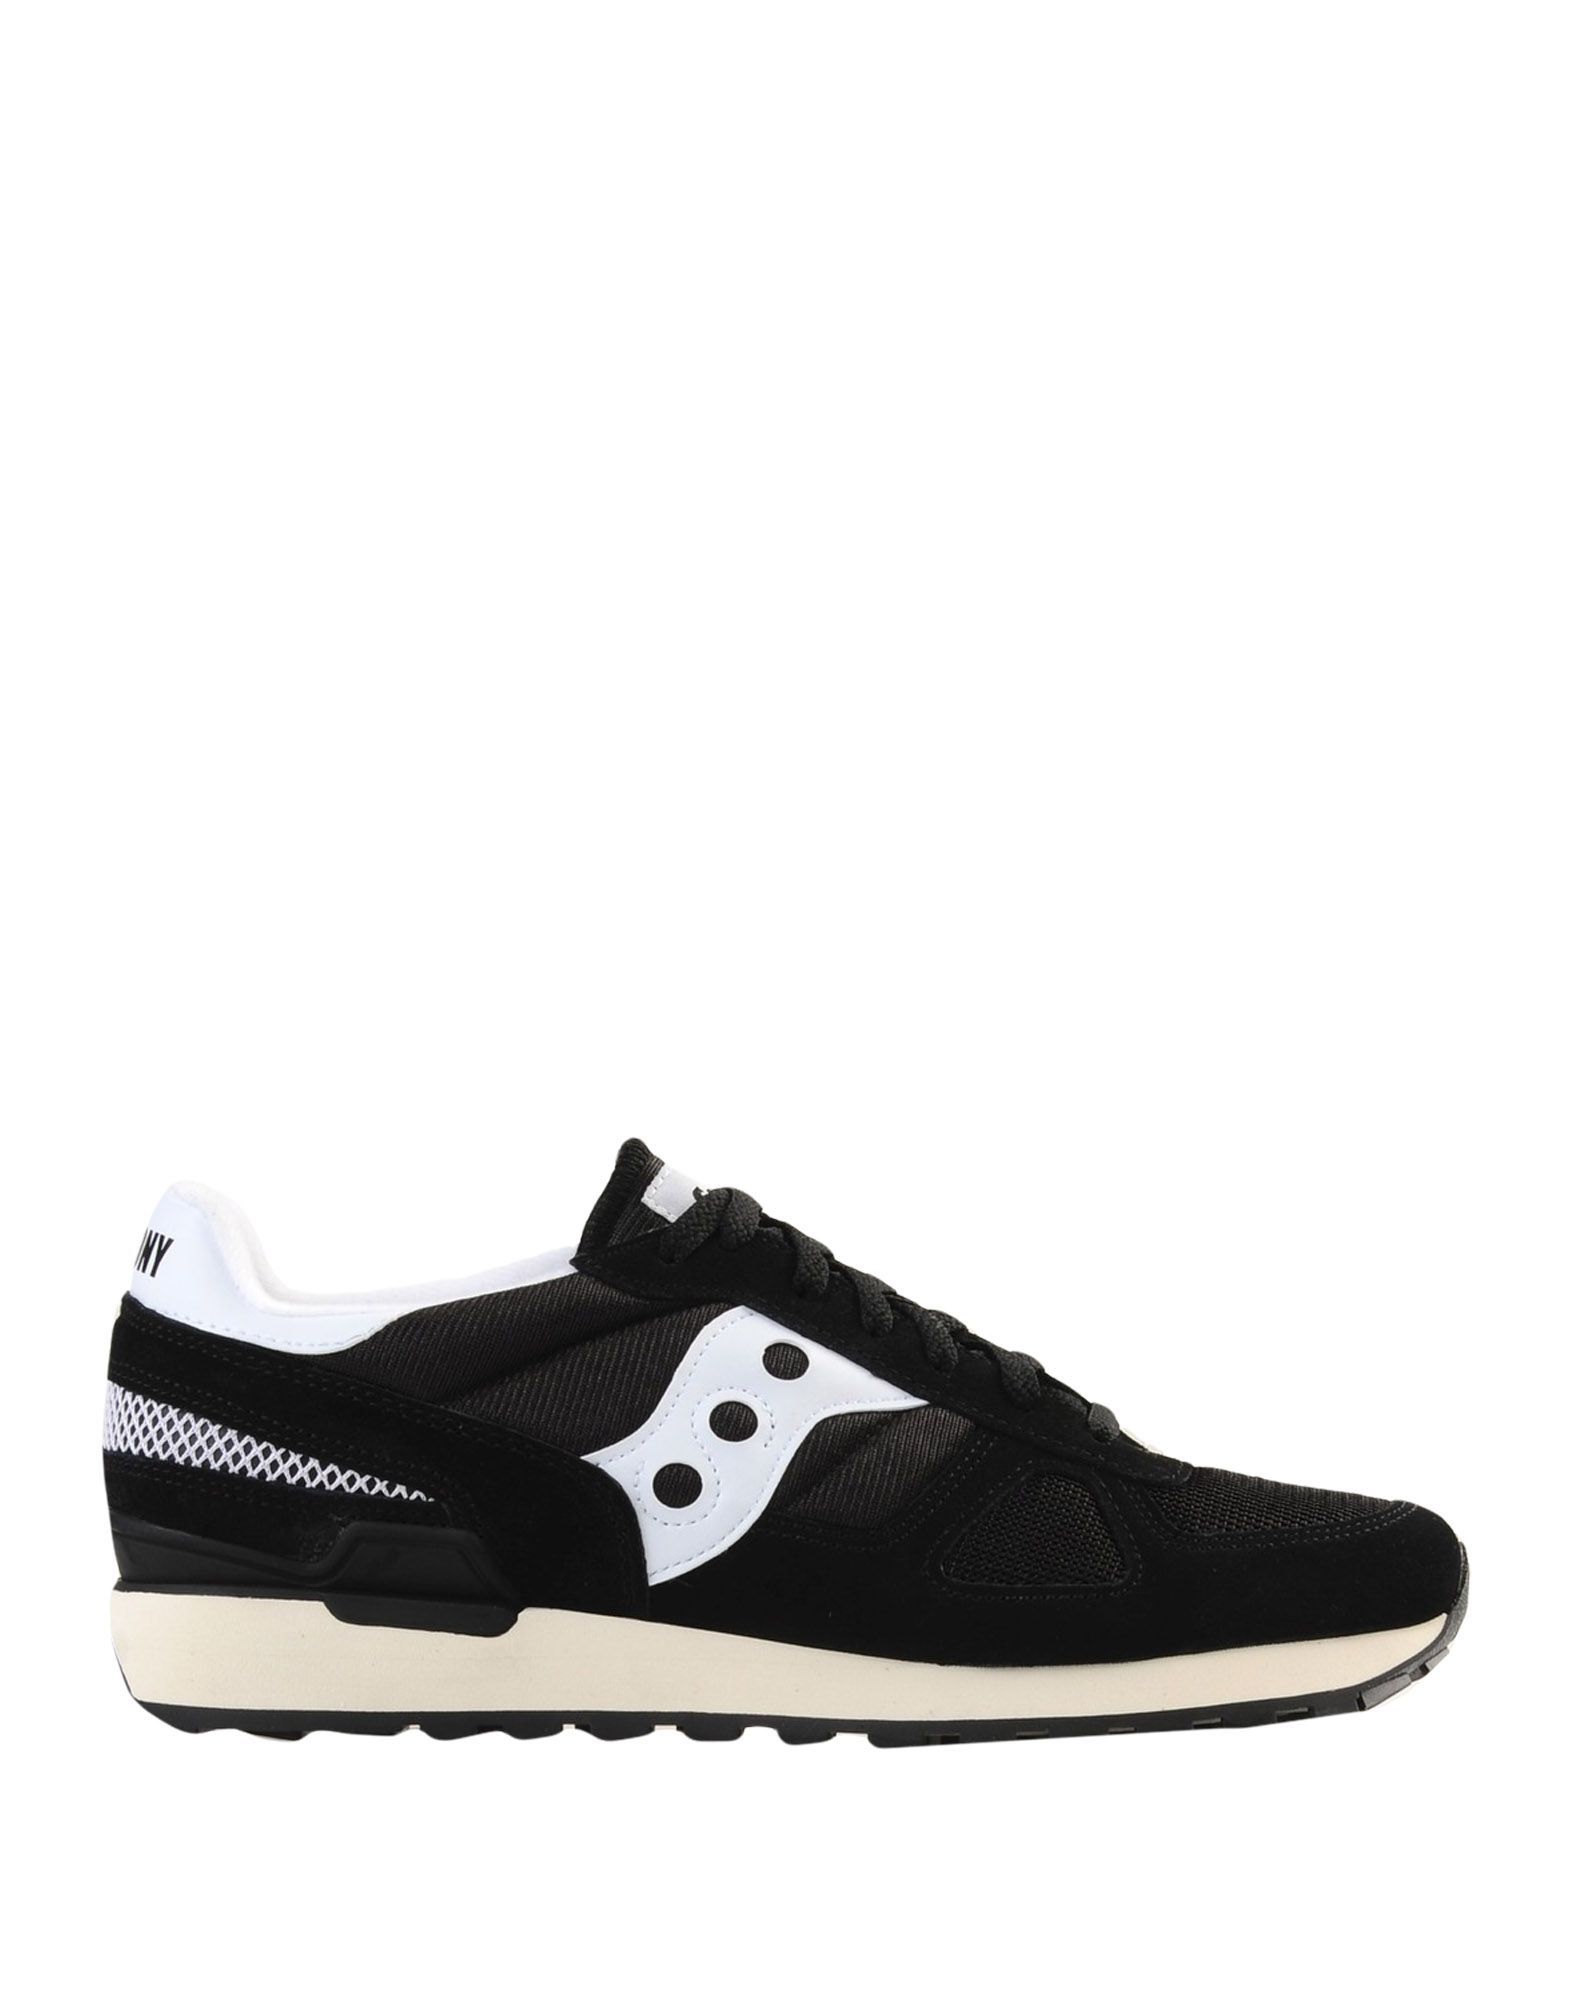 Saucony Black Leather Sneakers